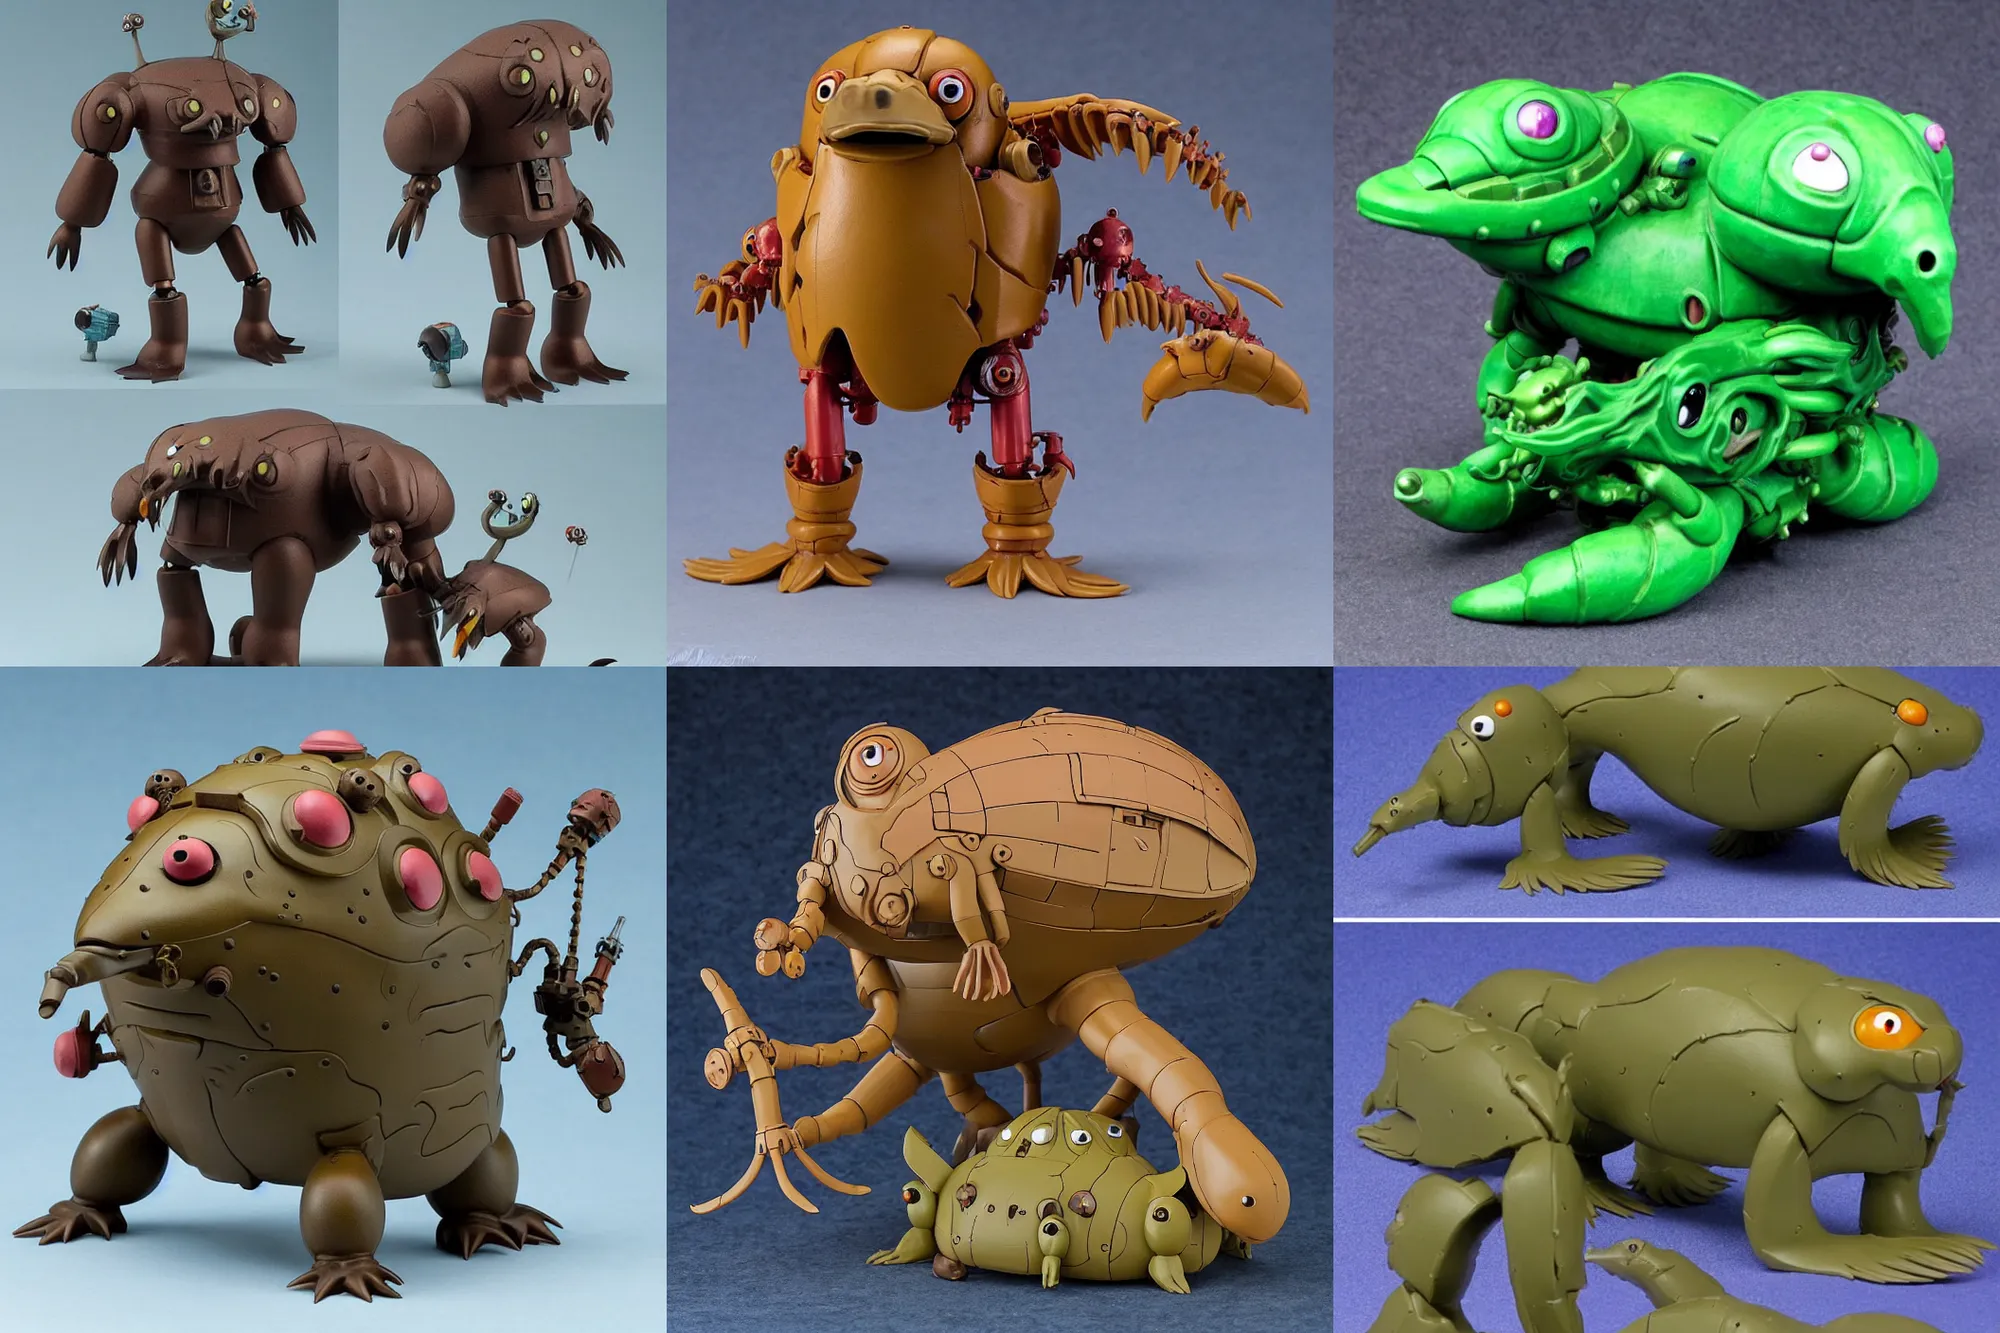 Prompt: A Lovecraftian scary giant mechanized adorable platypus from Studio Ghibli Howl's Moving Castle (2004) as a 1980's Kenner style action figure, 5 points of articulation, full body, 4k, highly detailed. award winning sci-fi. look at all that detail!